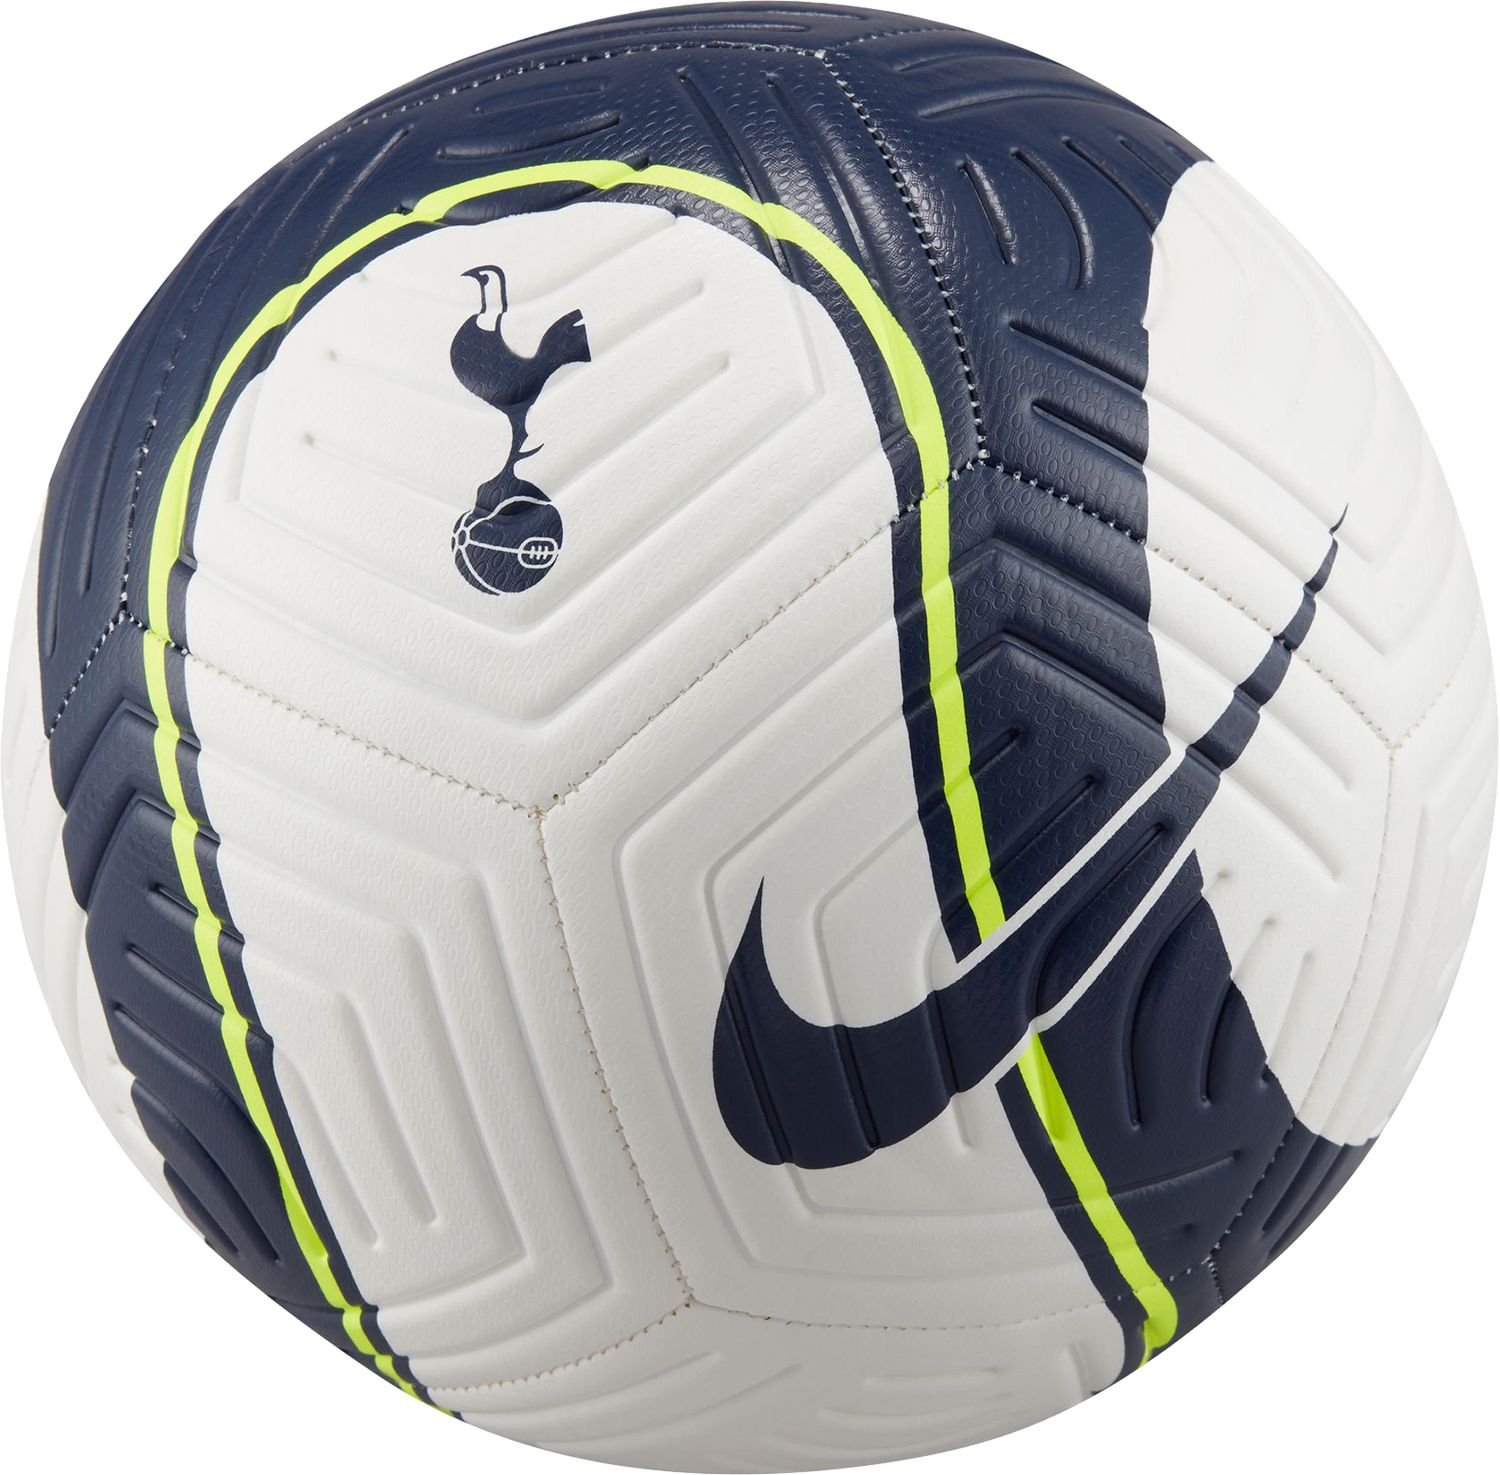 Premier League Soccer Balls - Curbside Pickup Available at DICK'S